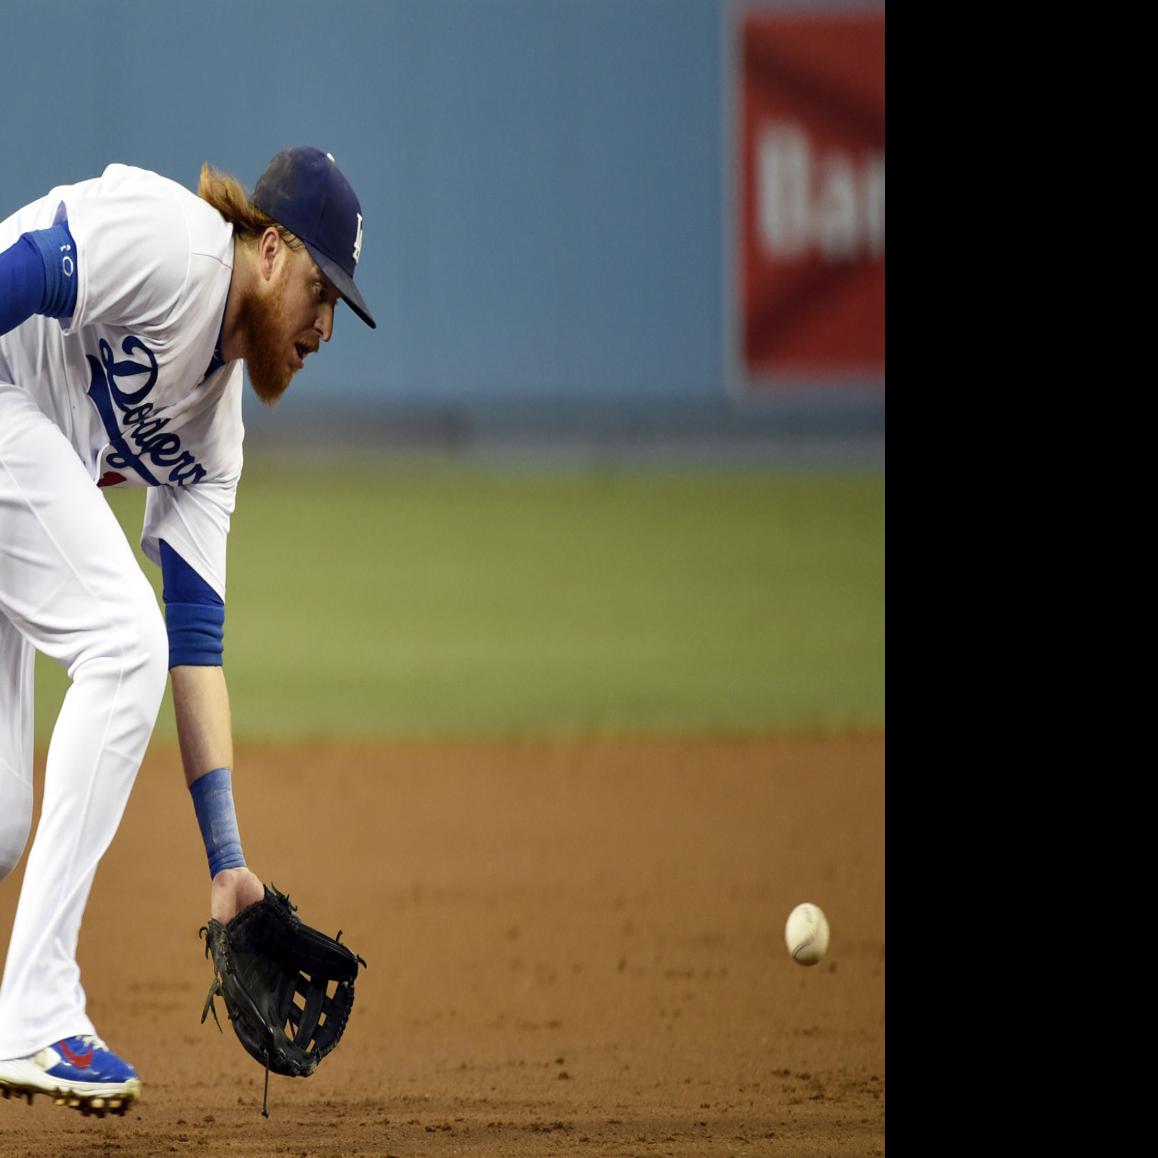 Clayton Kershaw strikes out 9 in Dodgers' 6-0 win over Reds